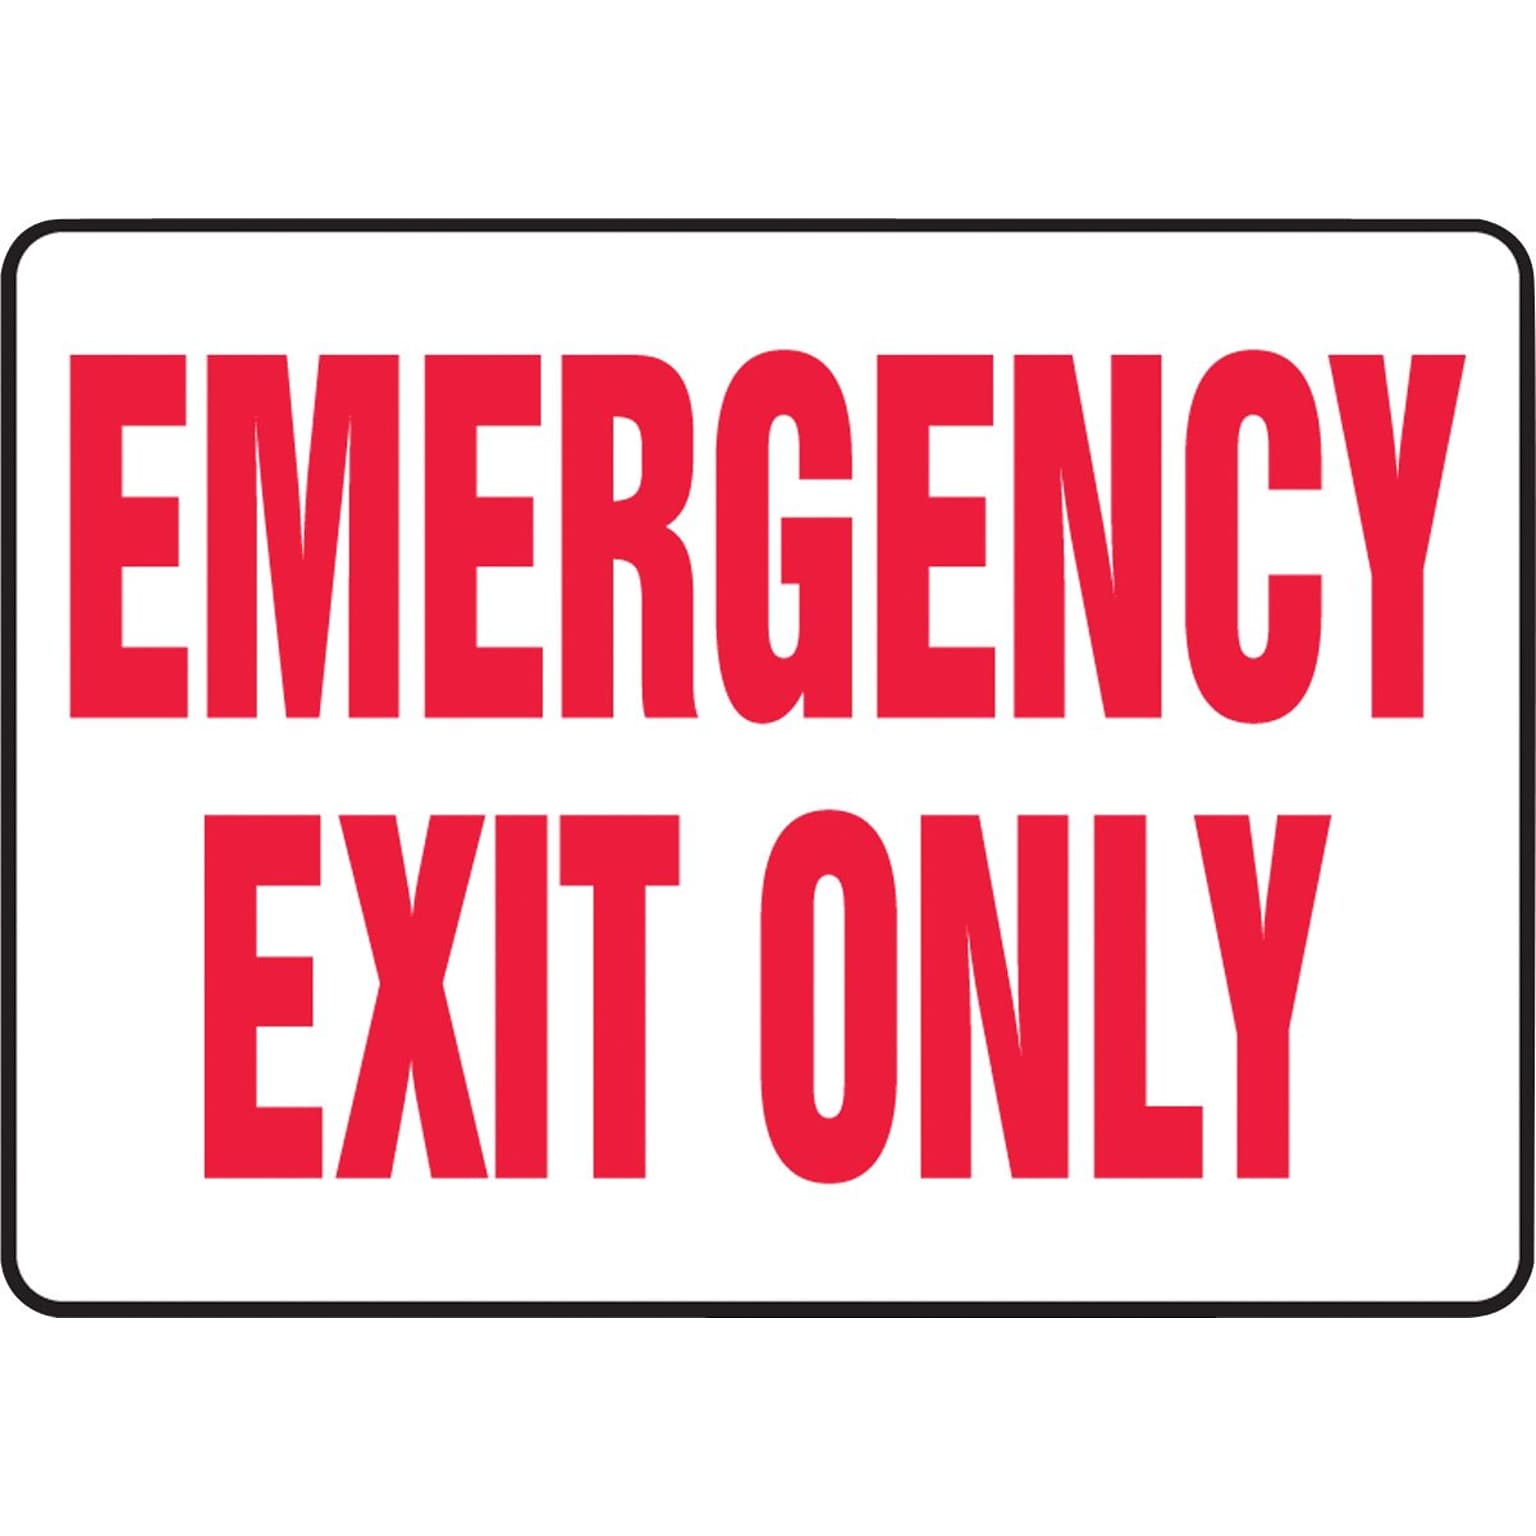 Accuform Safety Sign, EMERGENCY EXIT ONLY, 10 x 14, Plastic (MEXT918VP)